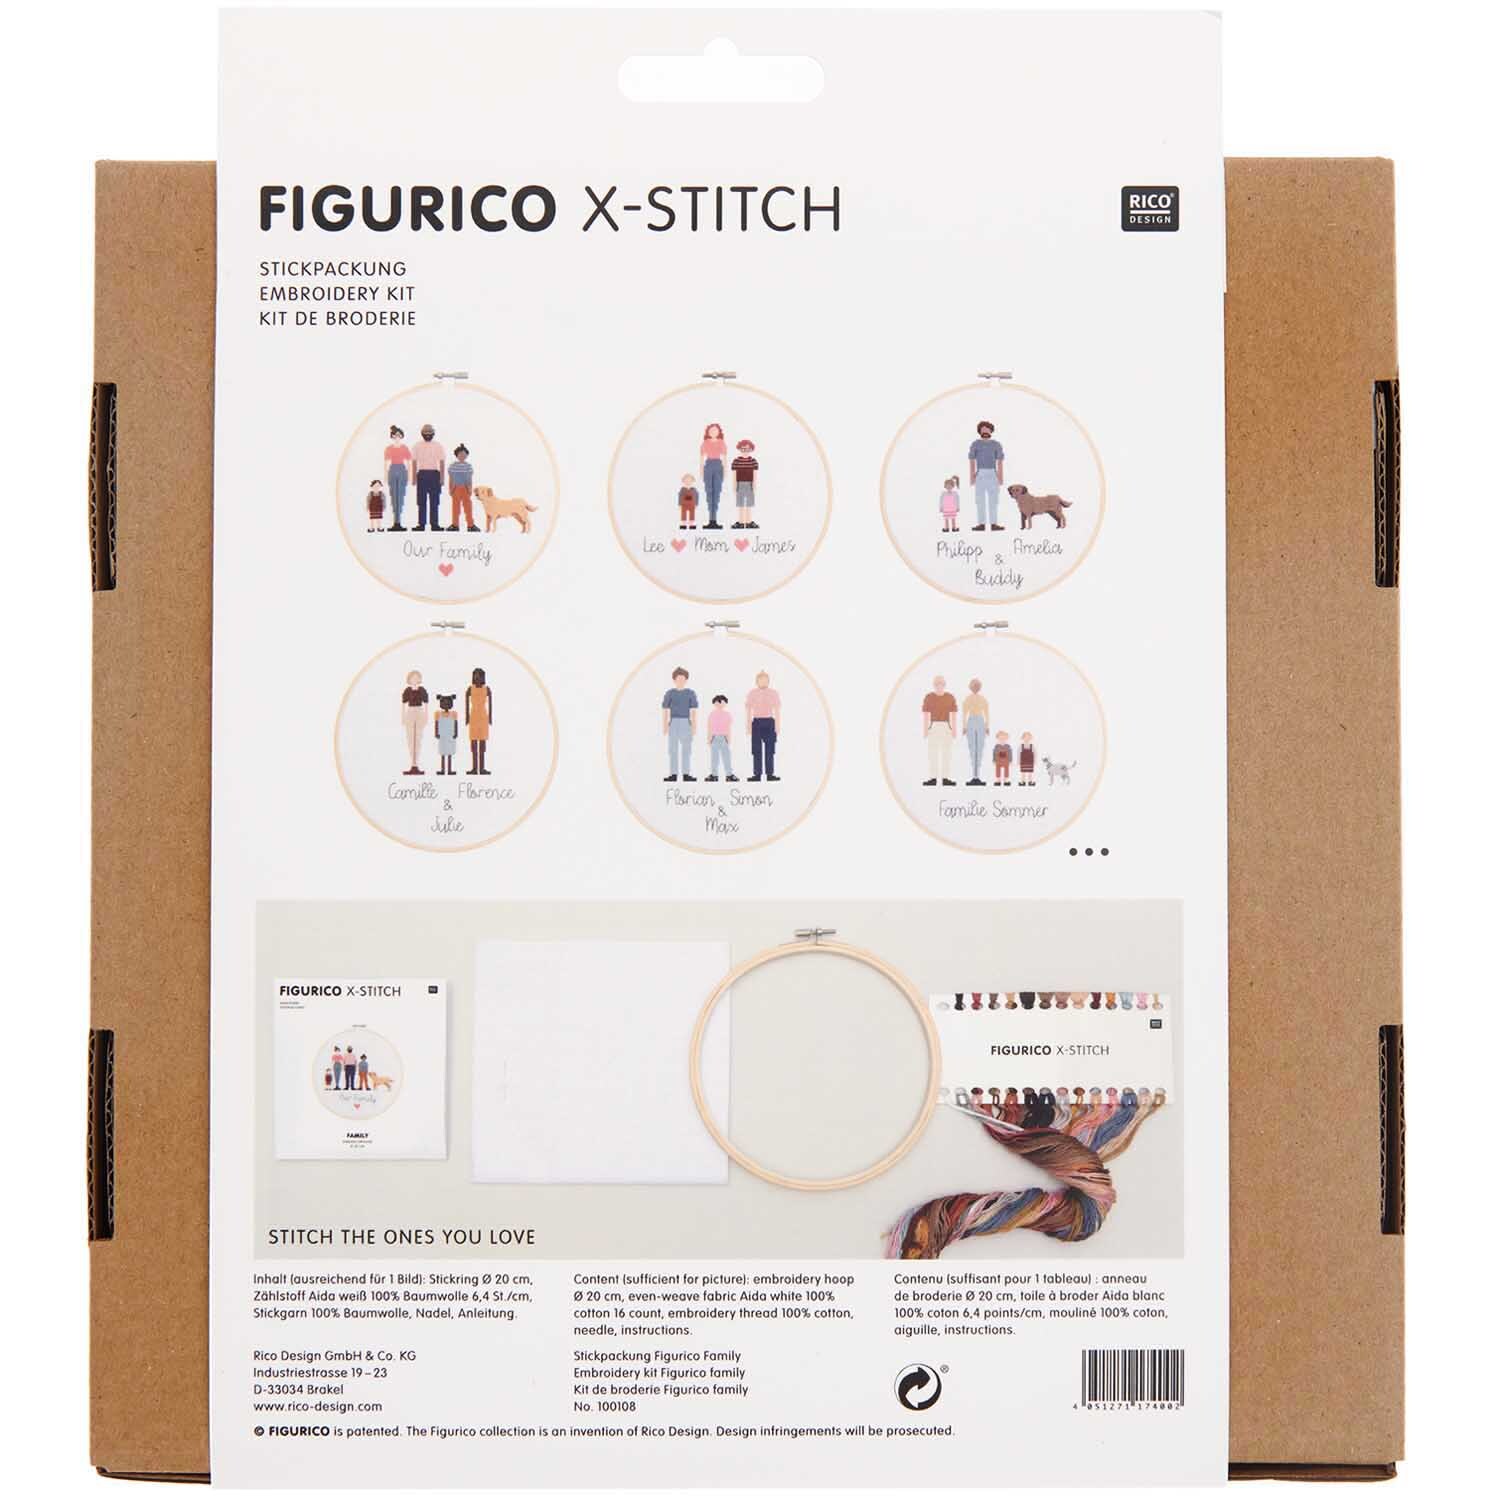 Figurico Stickpackung Family 20cm